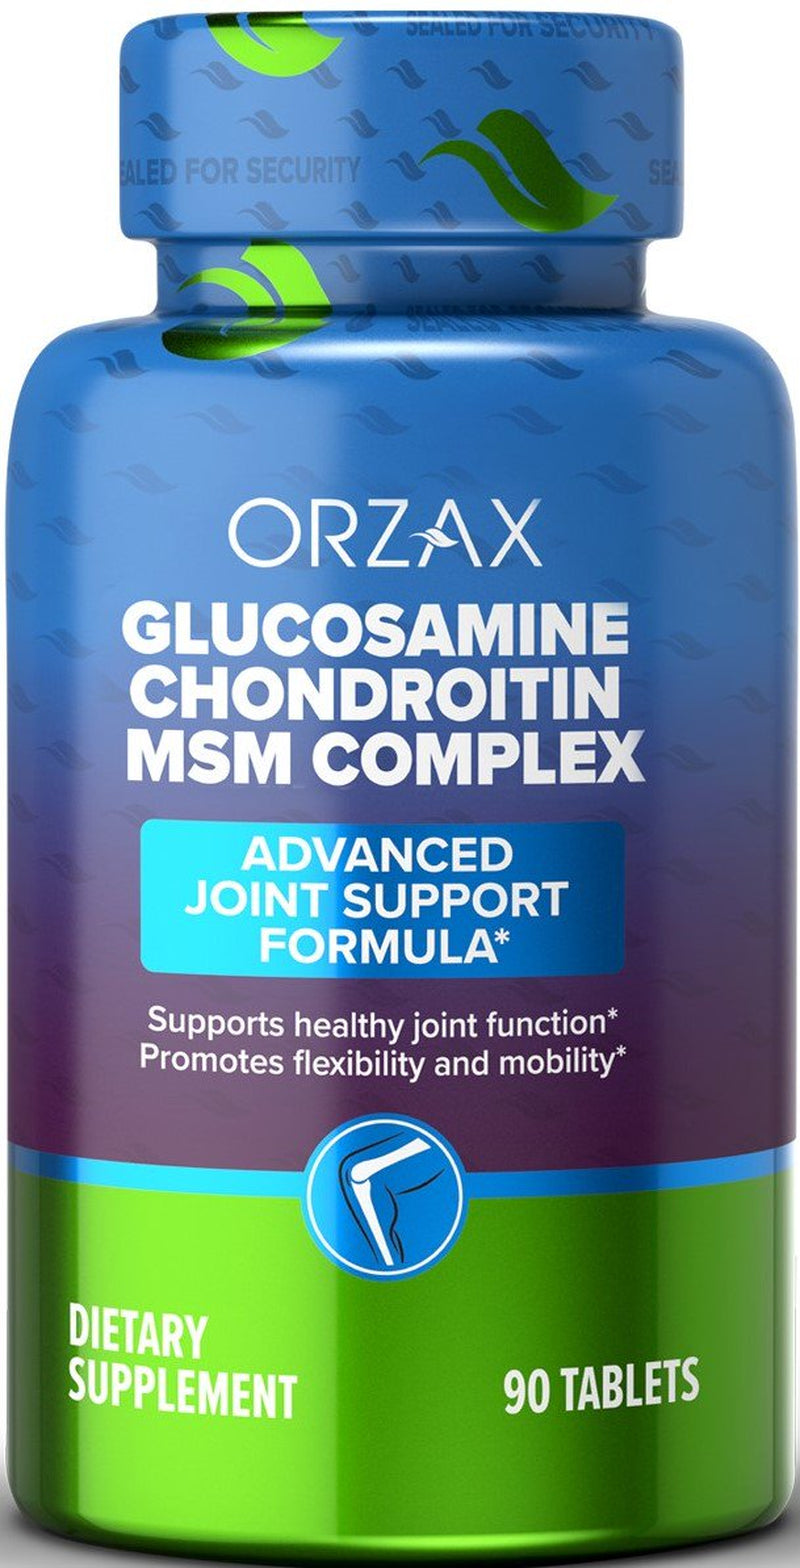 ORZAX All-In-One Joint Support Supplement with Glucosamine Chondroitin MSM - Turmeric, Collagen, Bromelain & Boswellia Extract Capsules, Function & Comfort - 90 Tablets